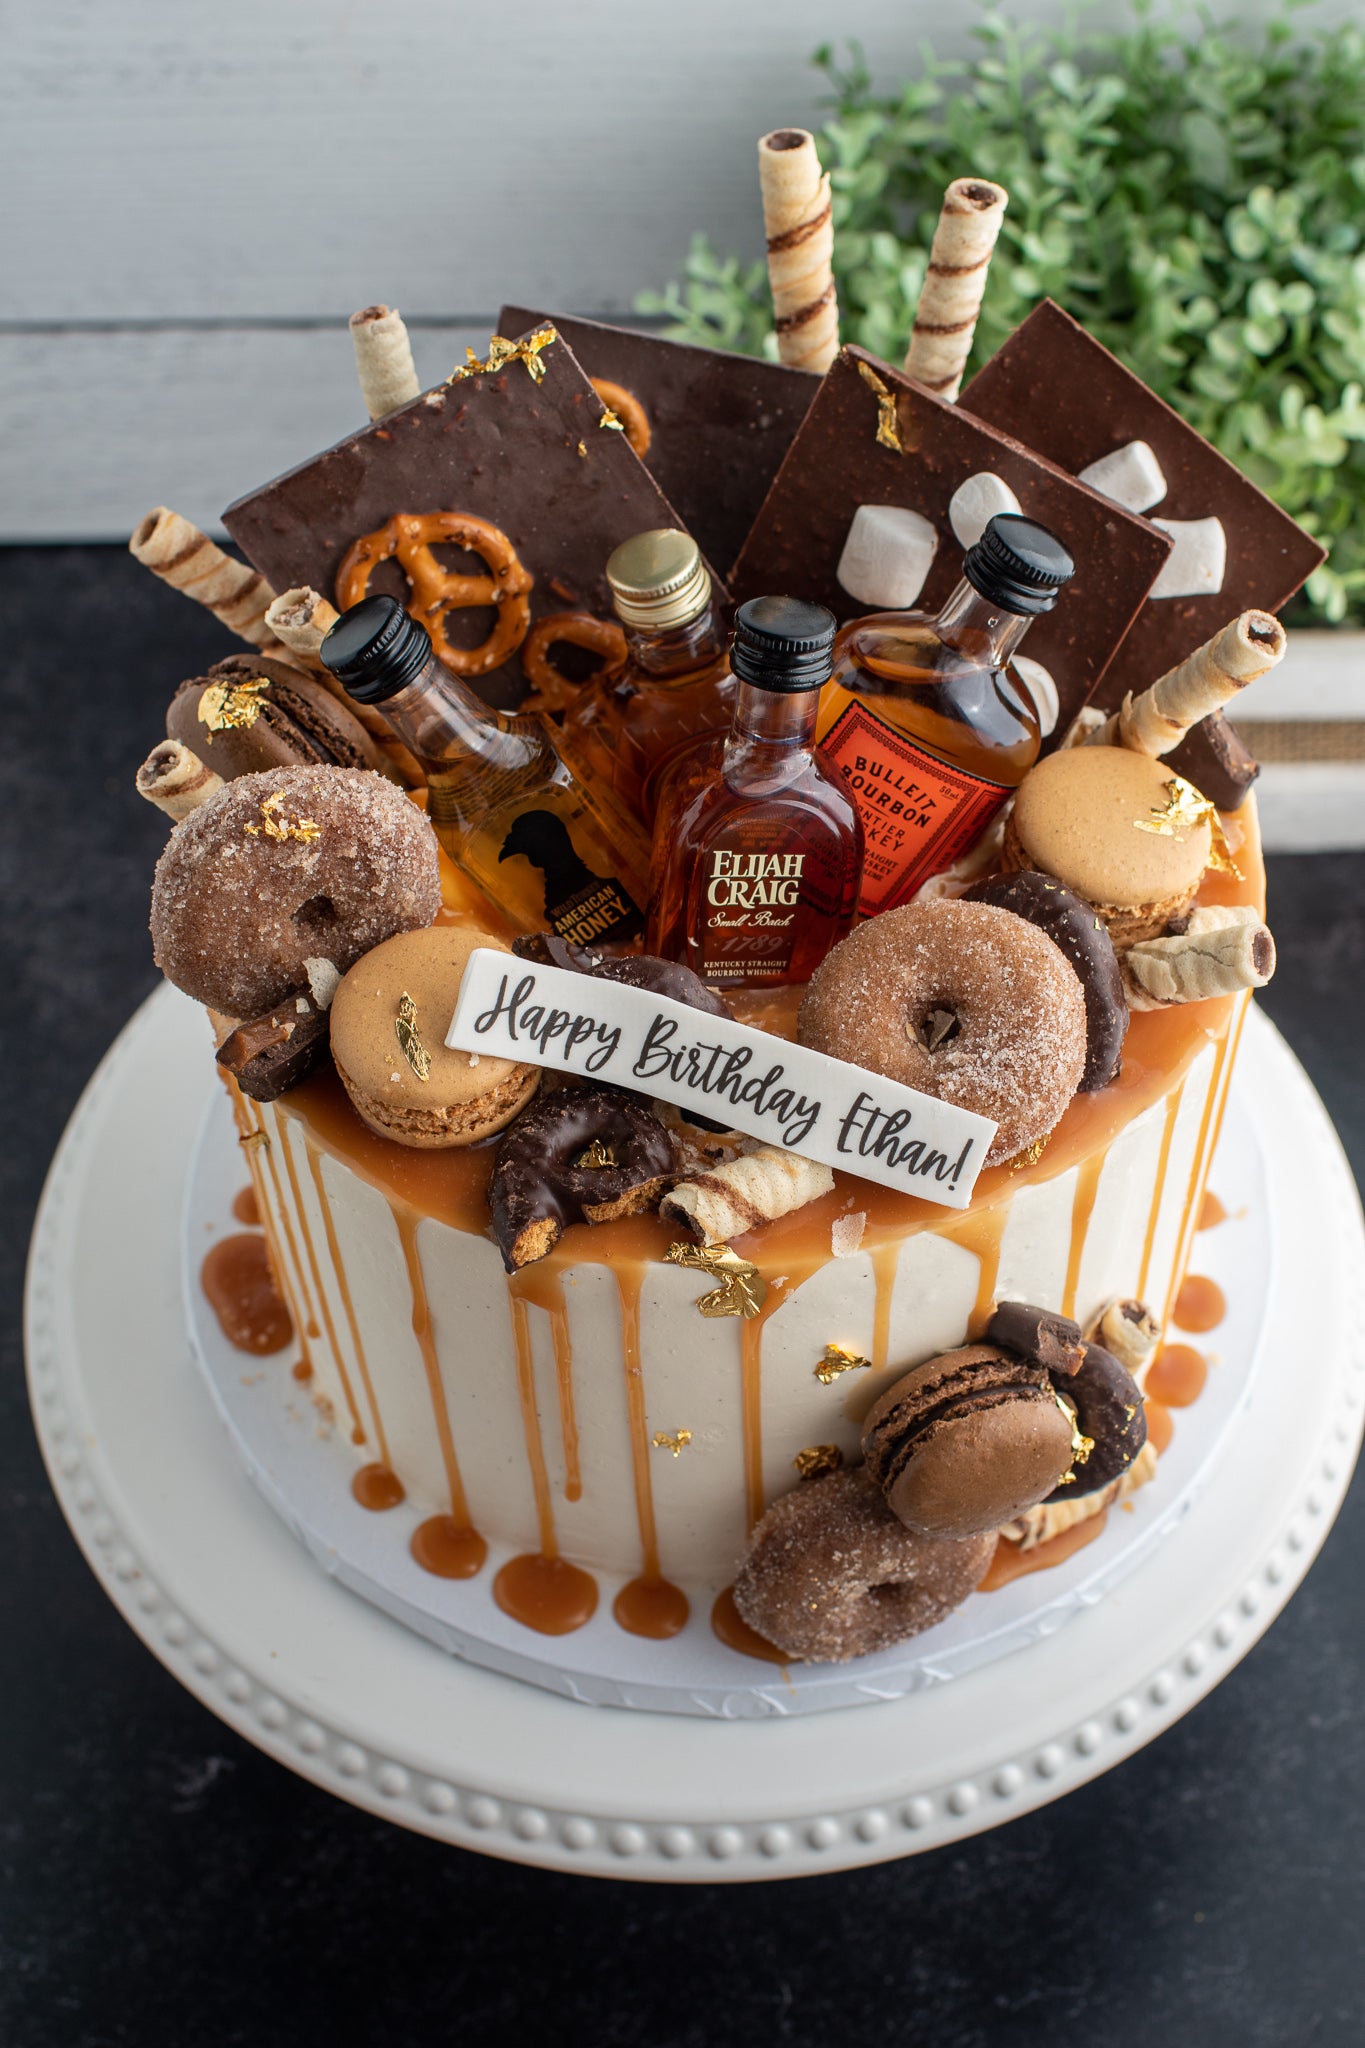 Cake ideas: 36 quirky and unique cakes and bakes for special occasions |  GoodtoKnow